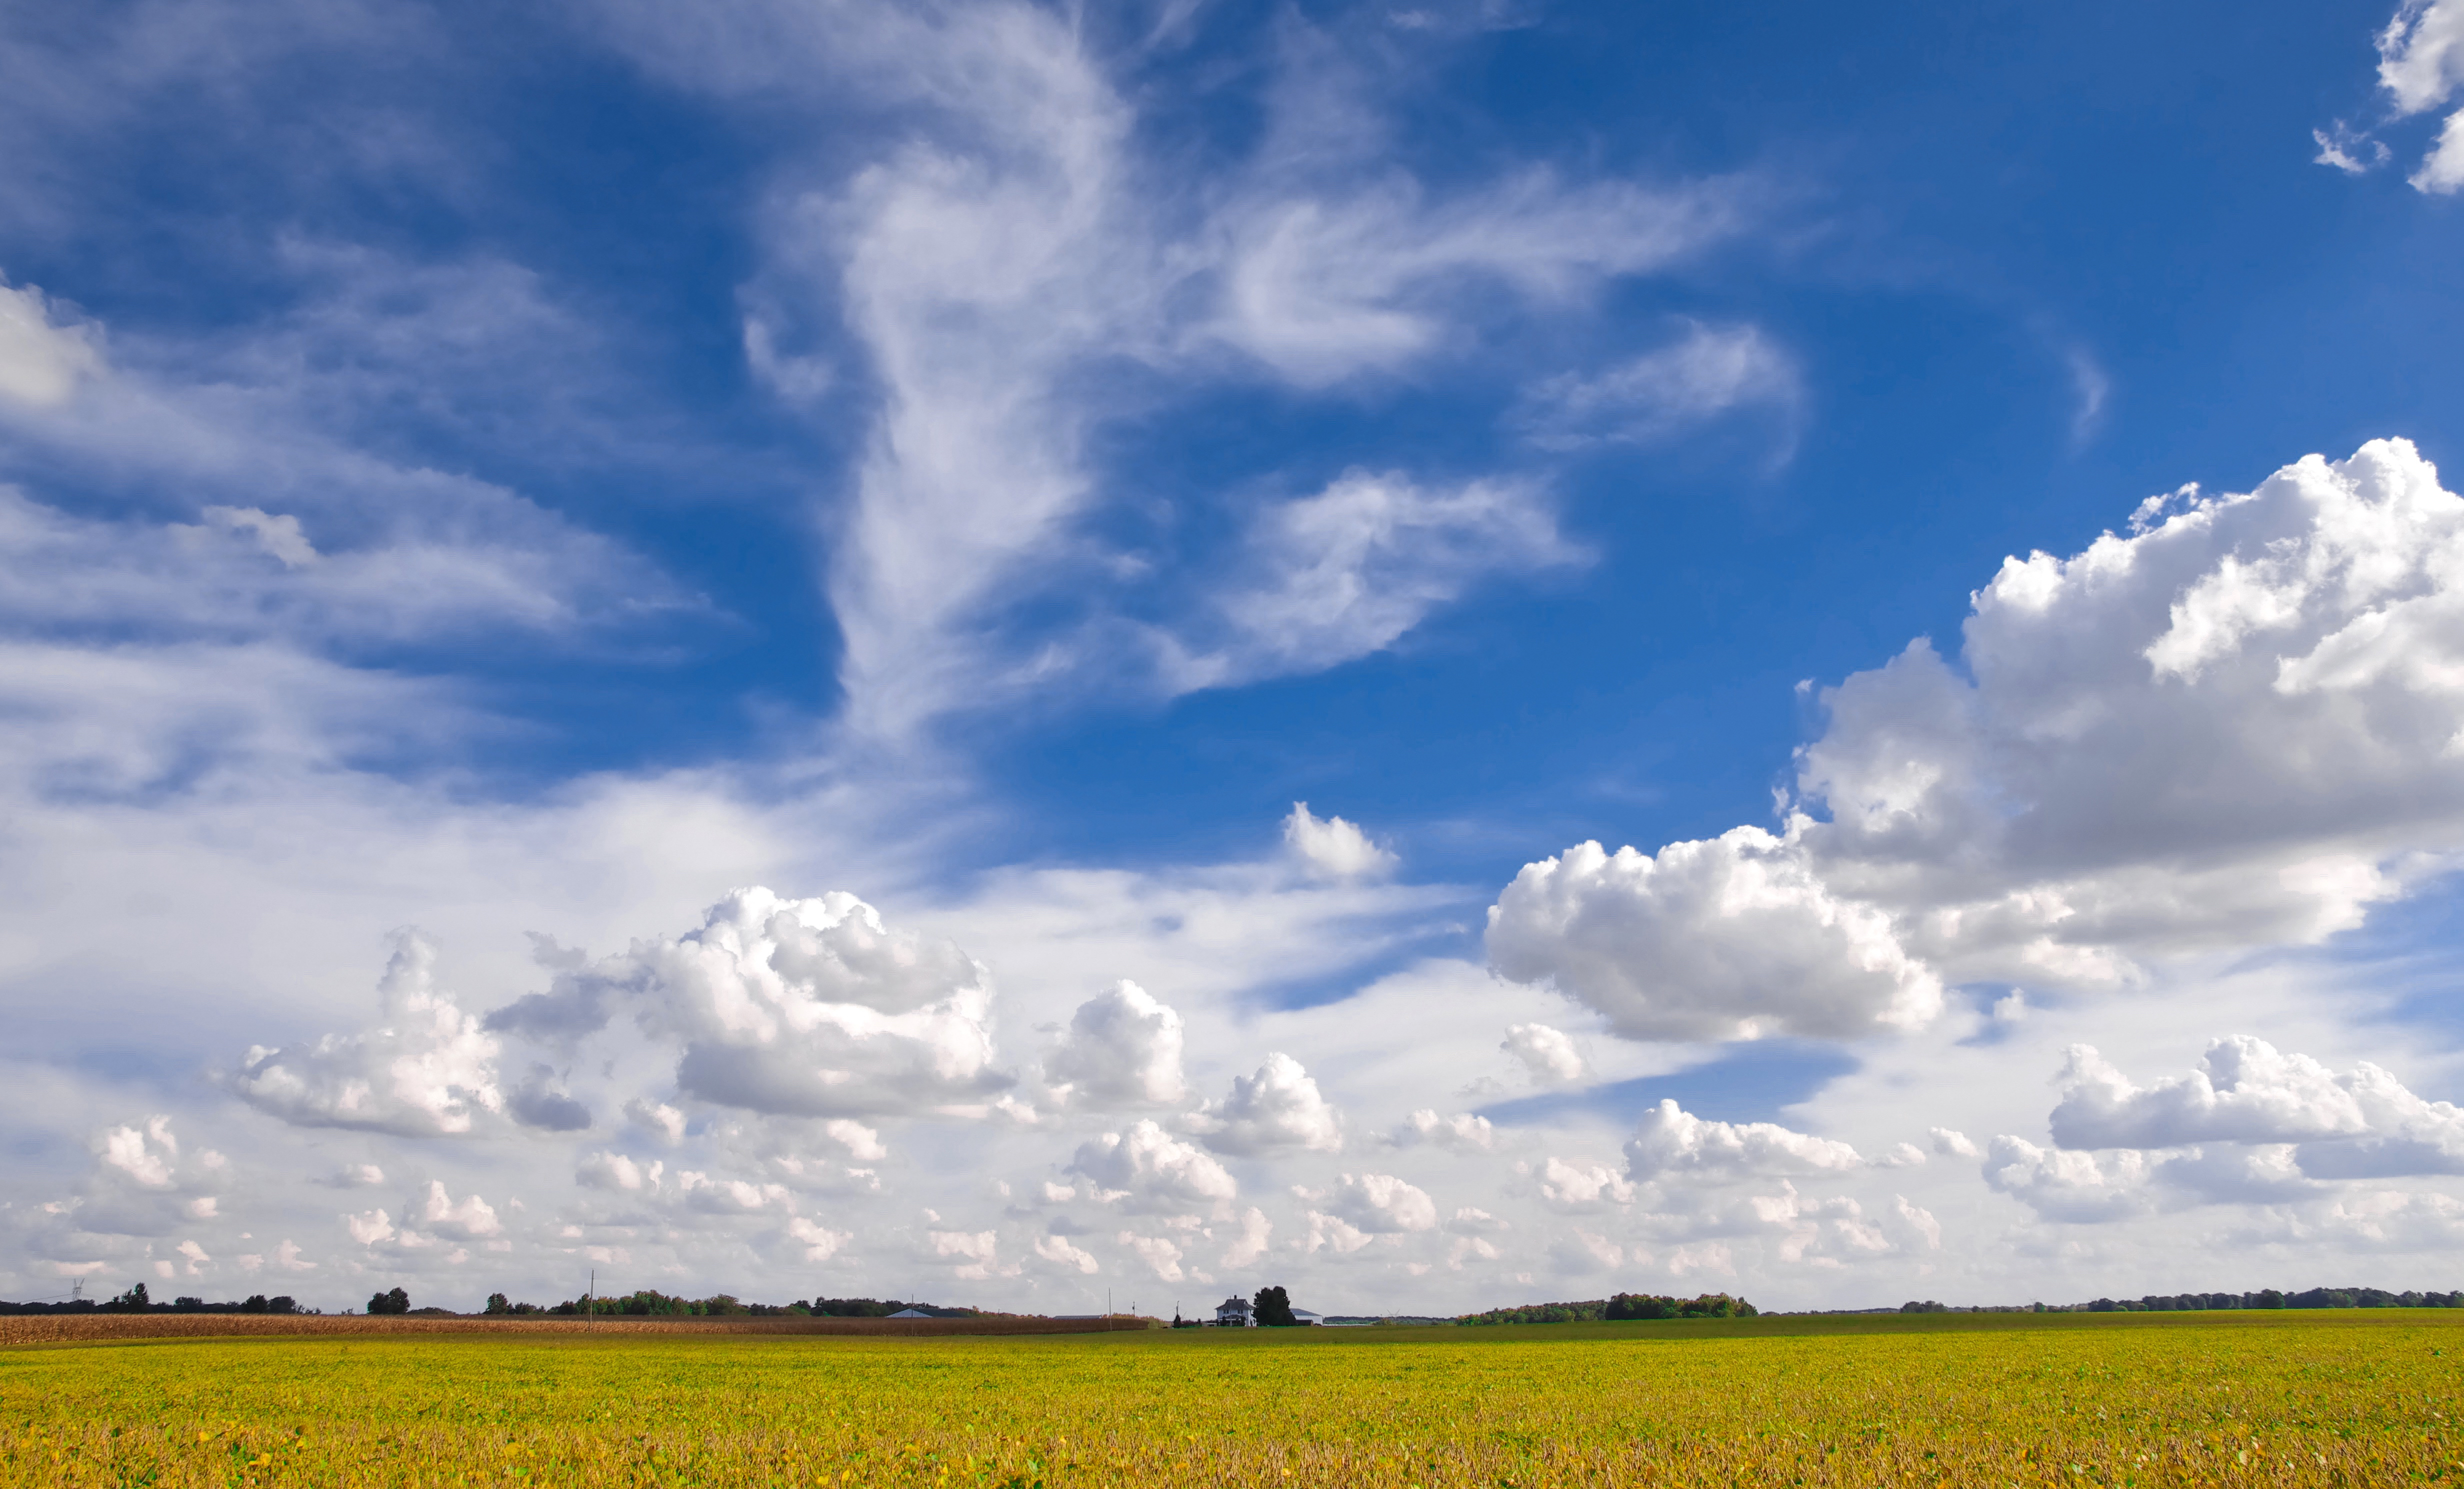 How Can Manmade Clouds Help the Environment?